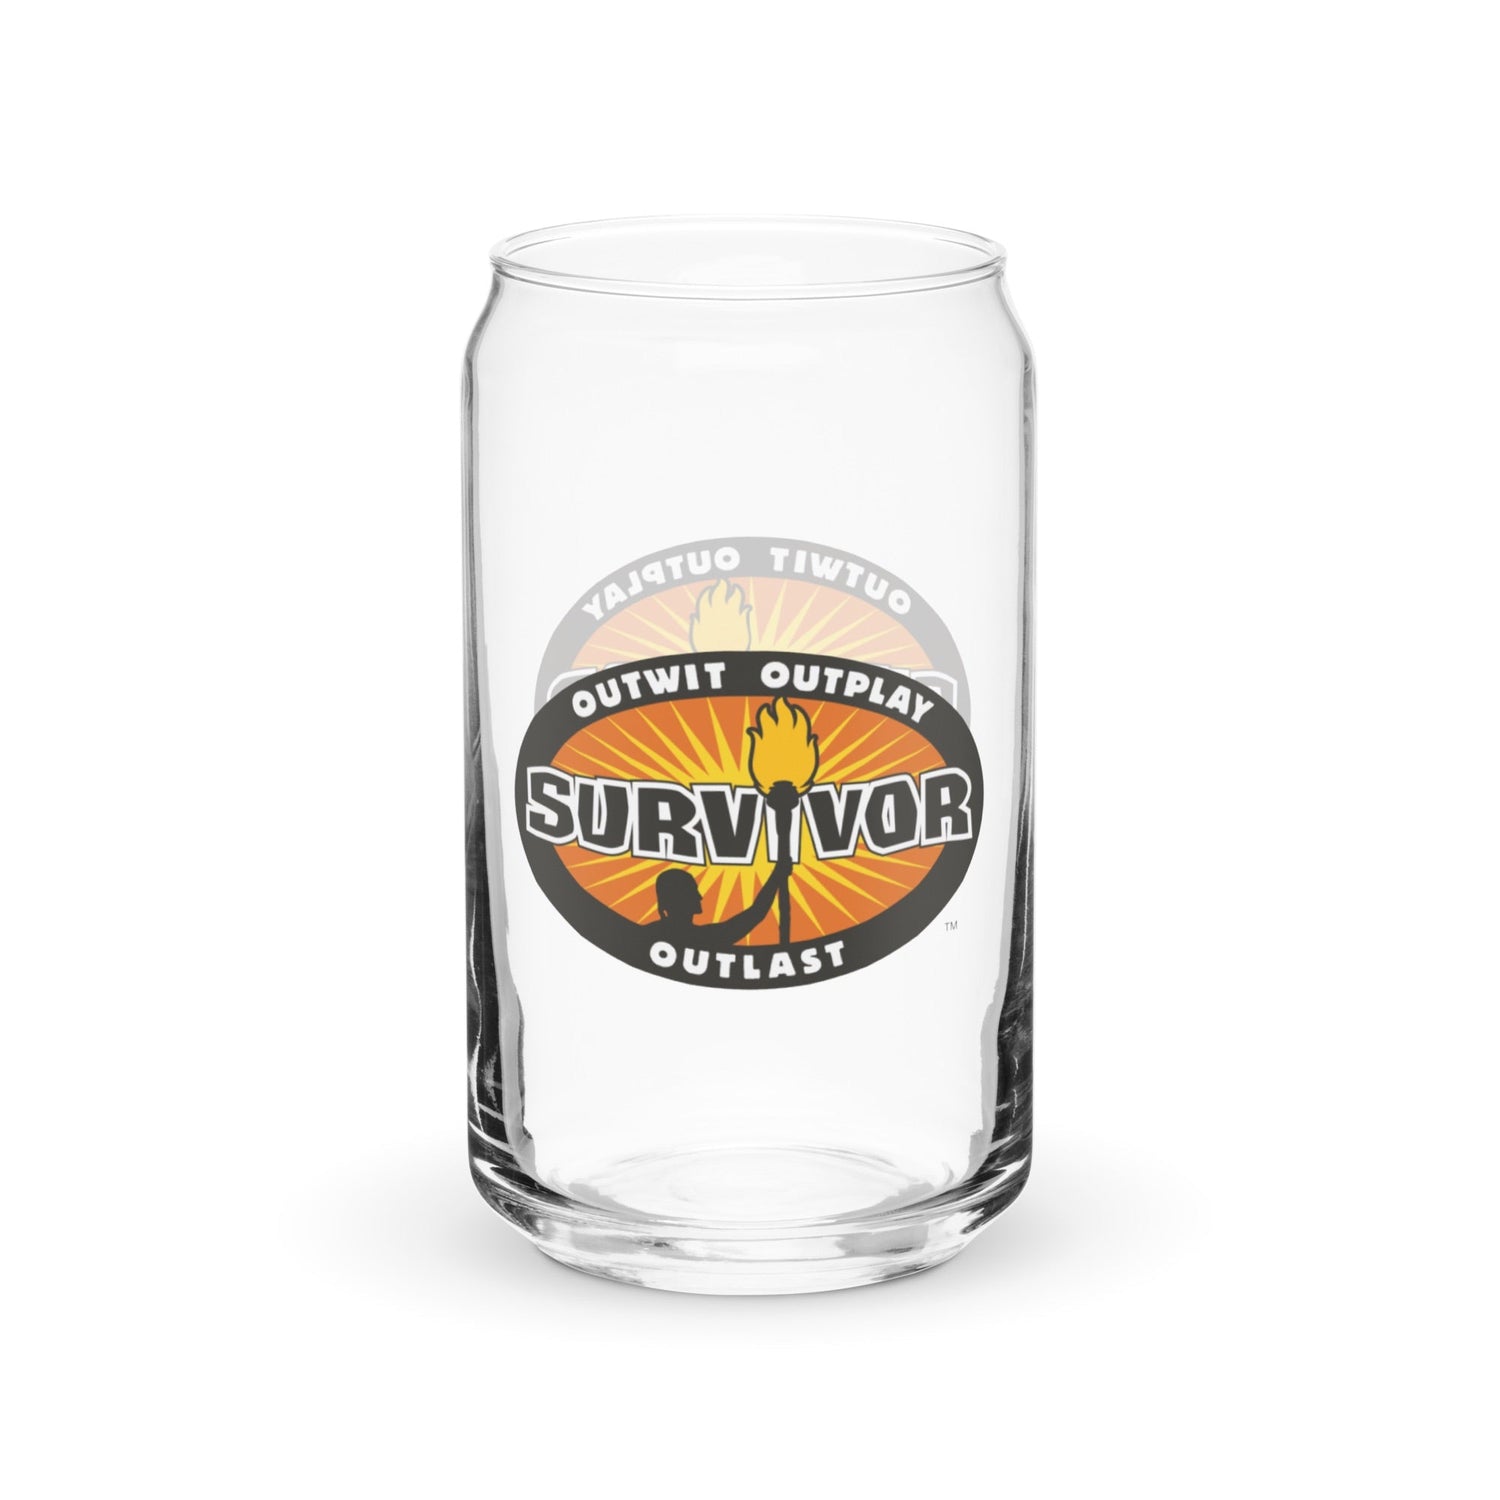 Survivor Outwit, Outplay, Outlast Can Shaped Glass - Paramount Shop